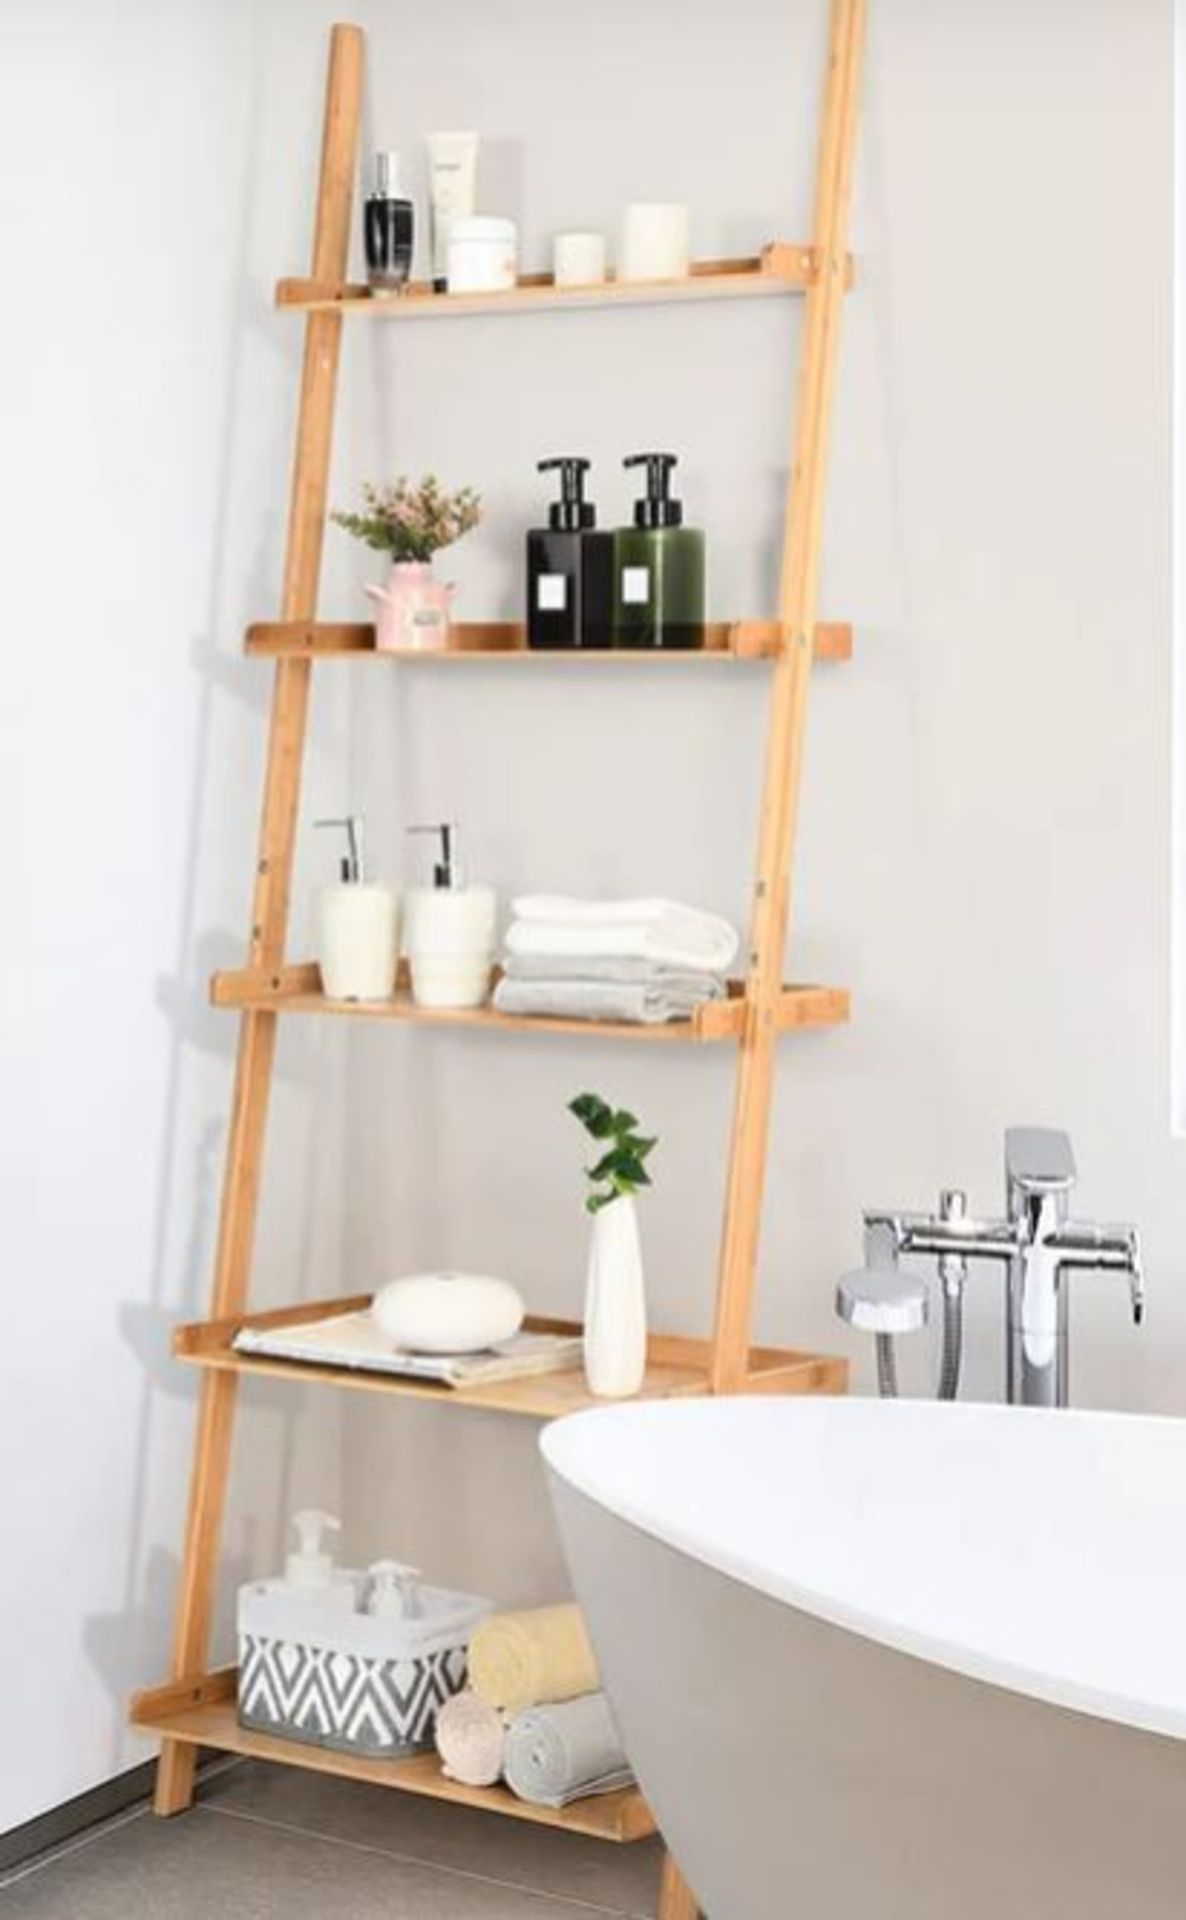 5 TIER BAMBOO LADDER SHELF WITH RAISED BAFFLE FOR LIVING ROOM. - ER53. Equipped with 5 open